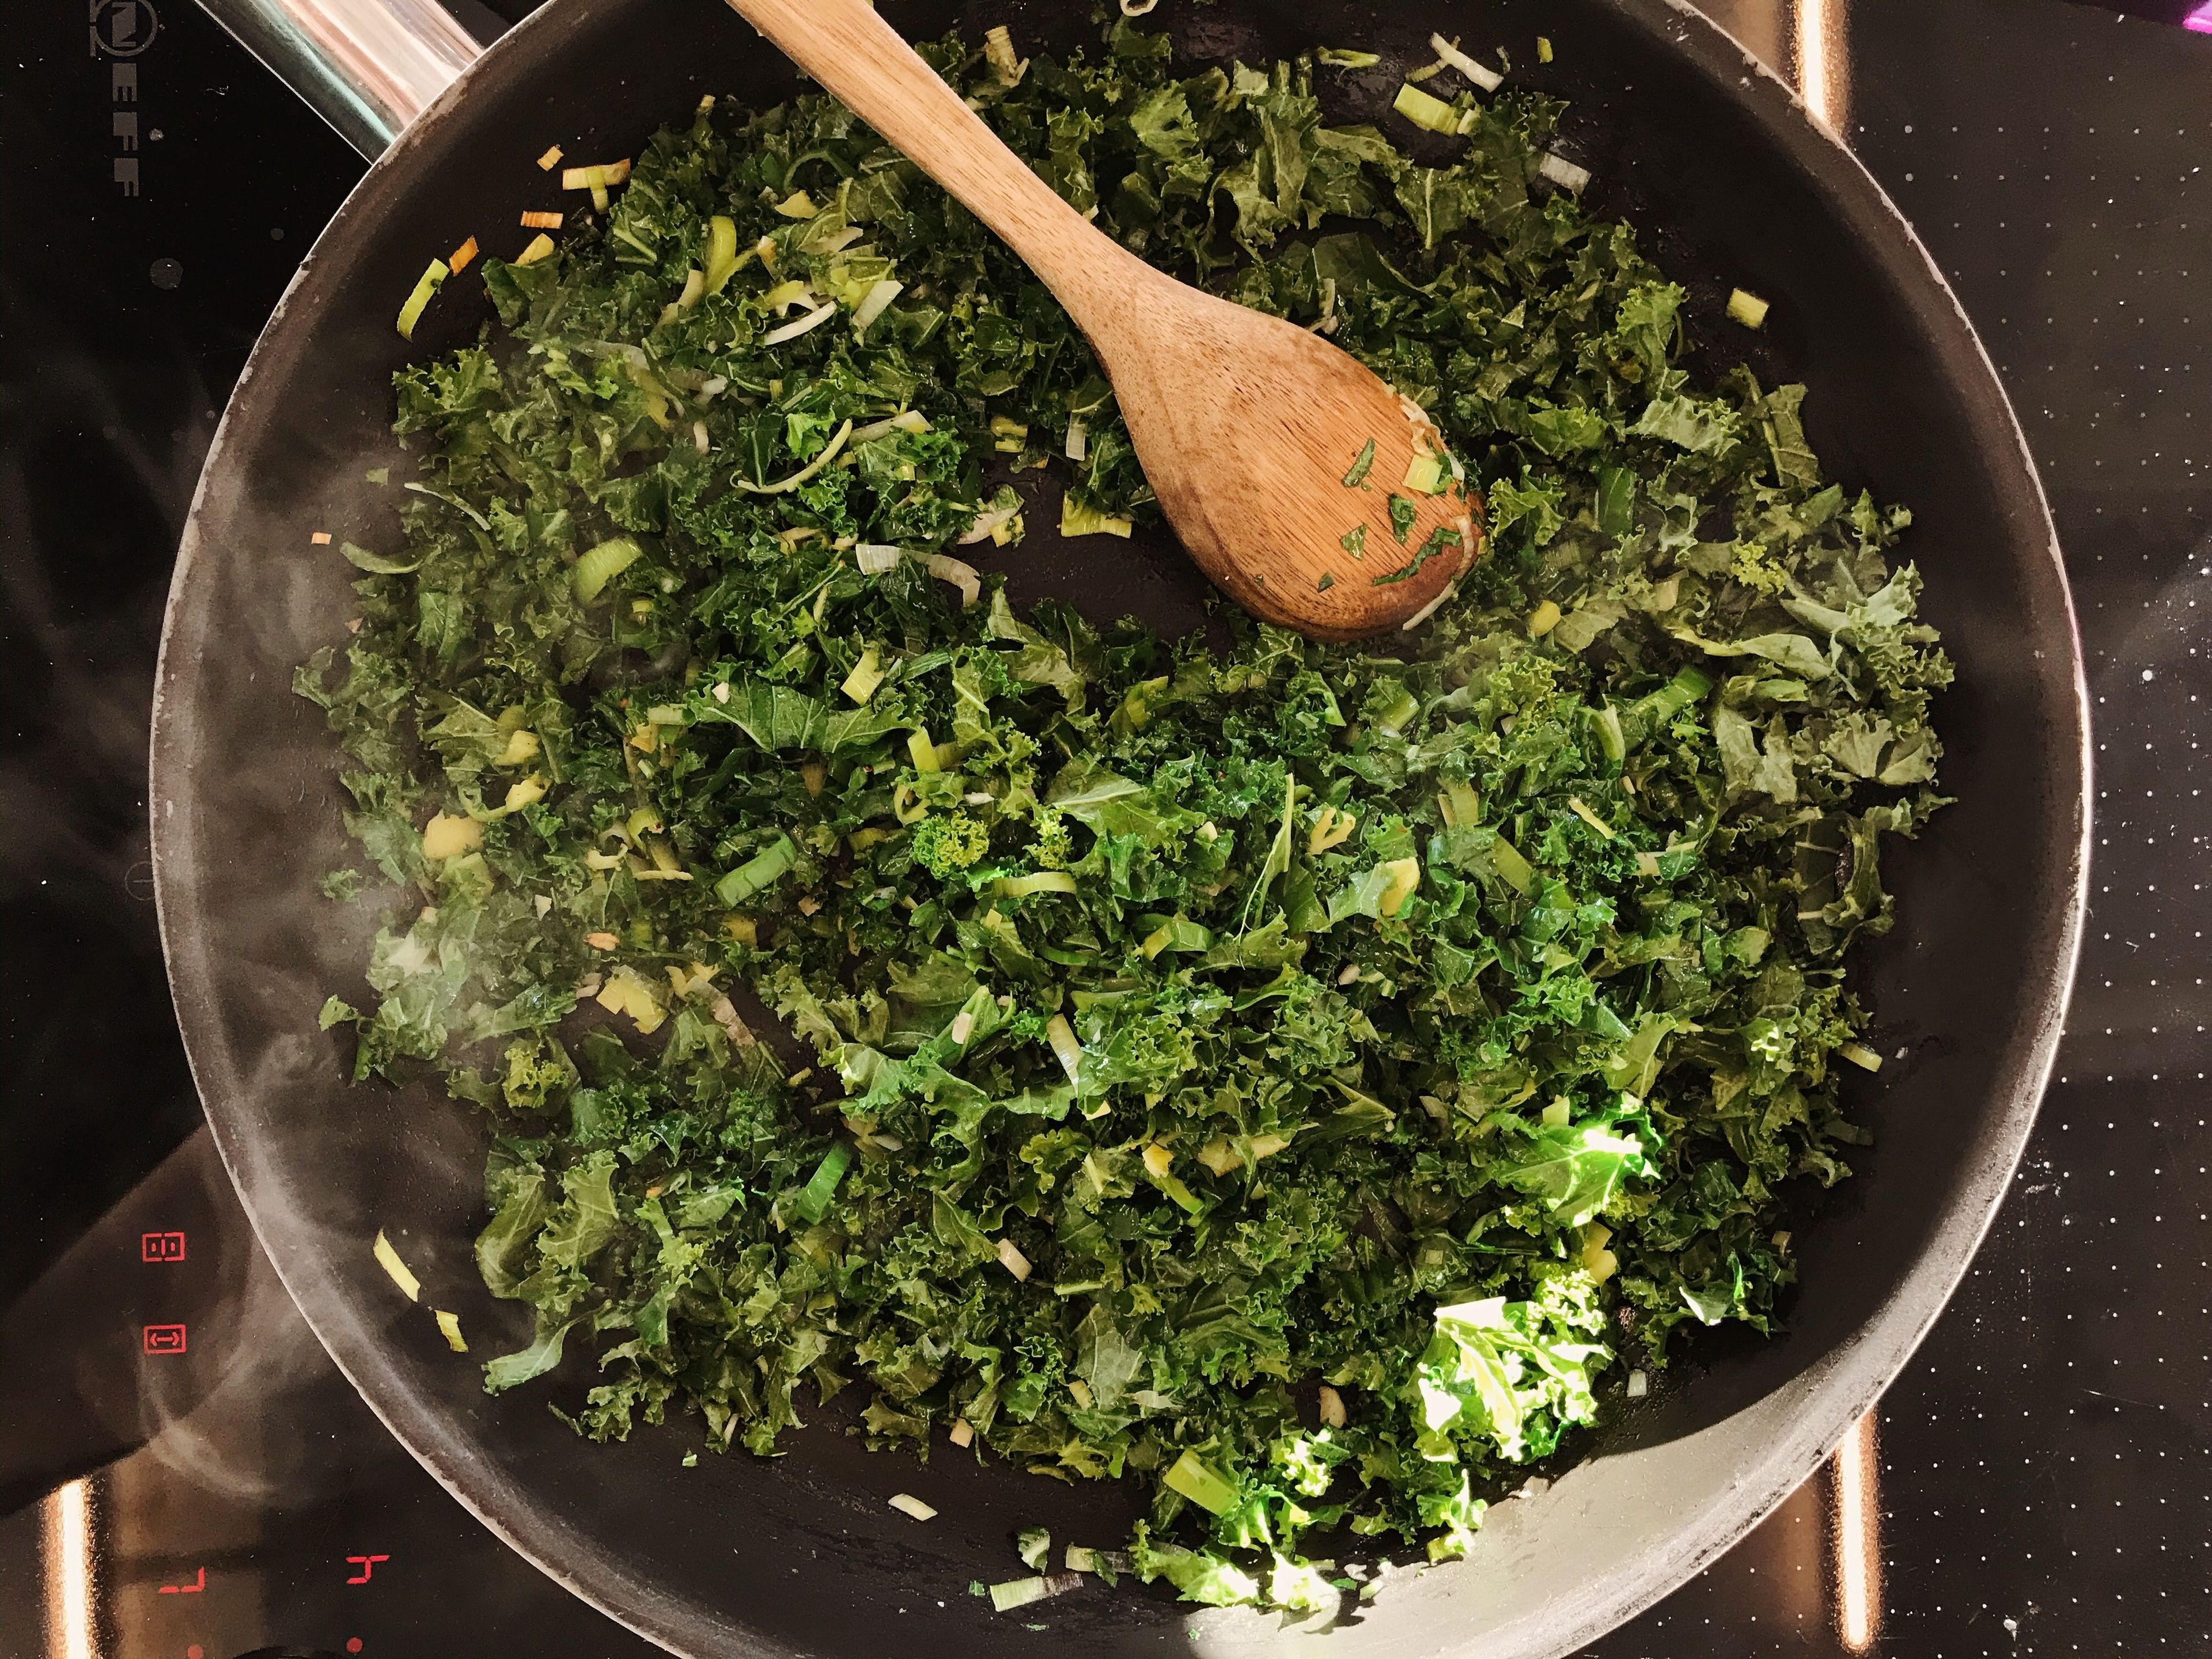 Melt some of the margarine in a large frying pan. First sauté the leeks for approx. 5 min., then add the garlic and sauté for another 2–3 min. Now add the chopped kale and sauté for approx. 5 min. more. Season with salt, pepper and a pinch of sugar.